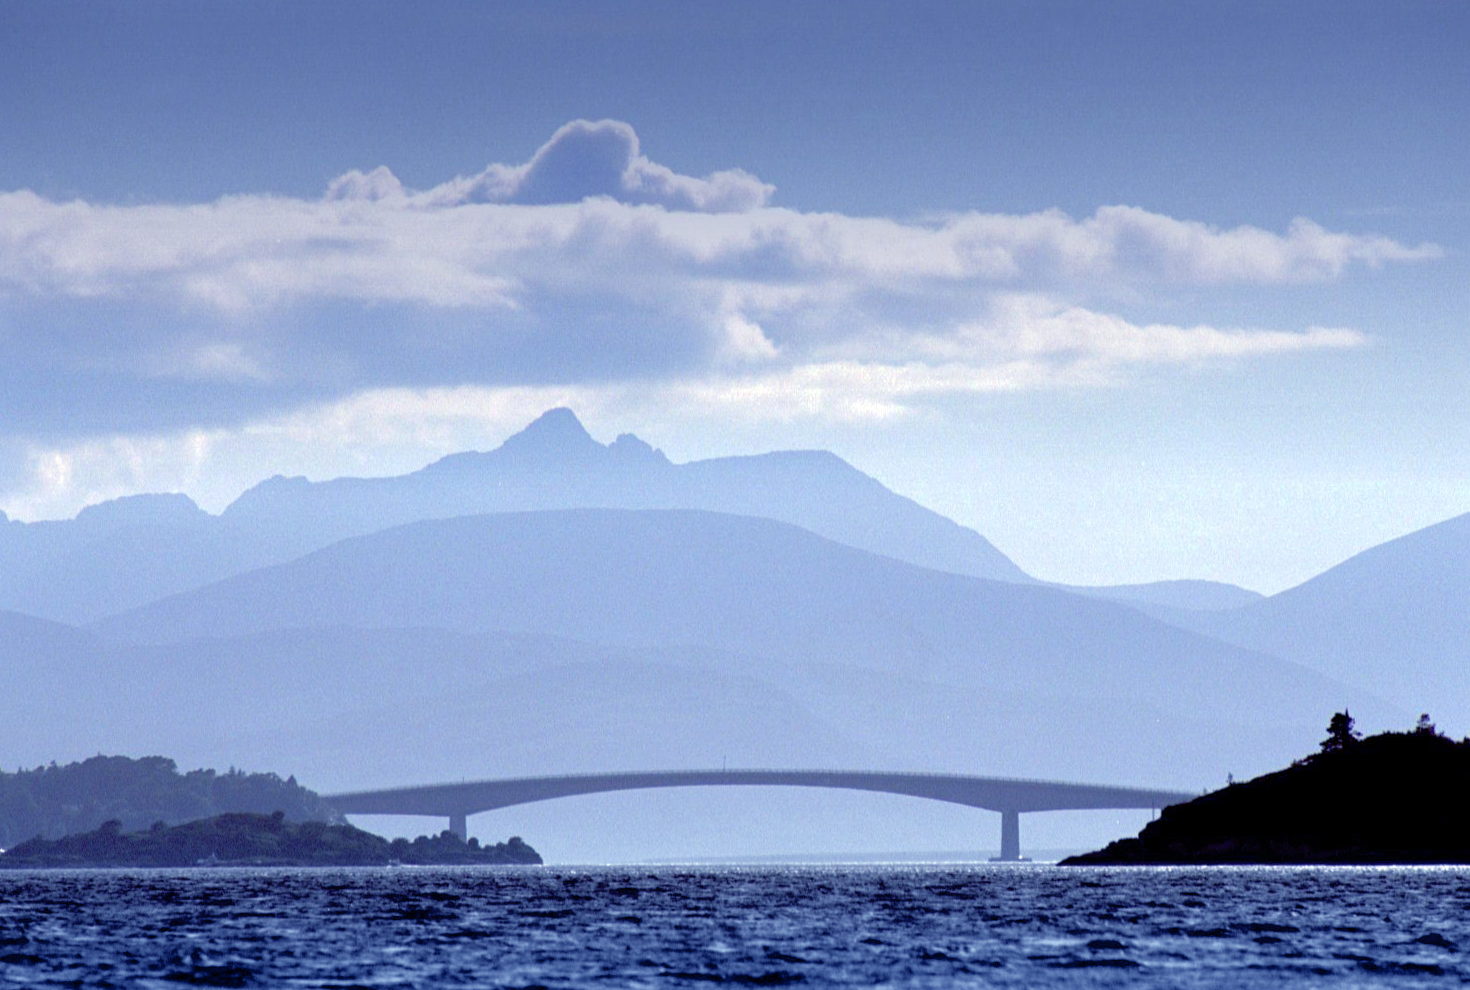 The Skye road bridge with the Cuillin mountain range on the Isle of Skye in the background. Scotland will be among the top spring and summer breaks.